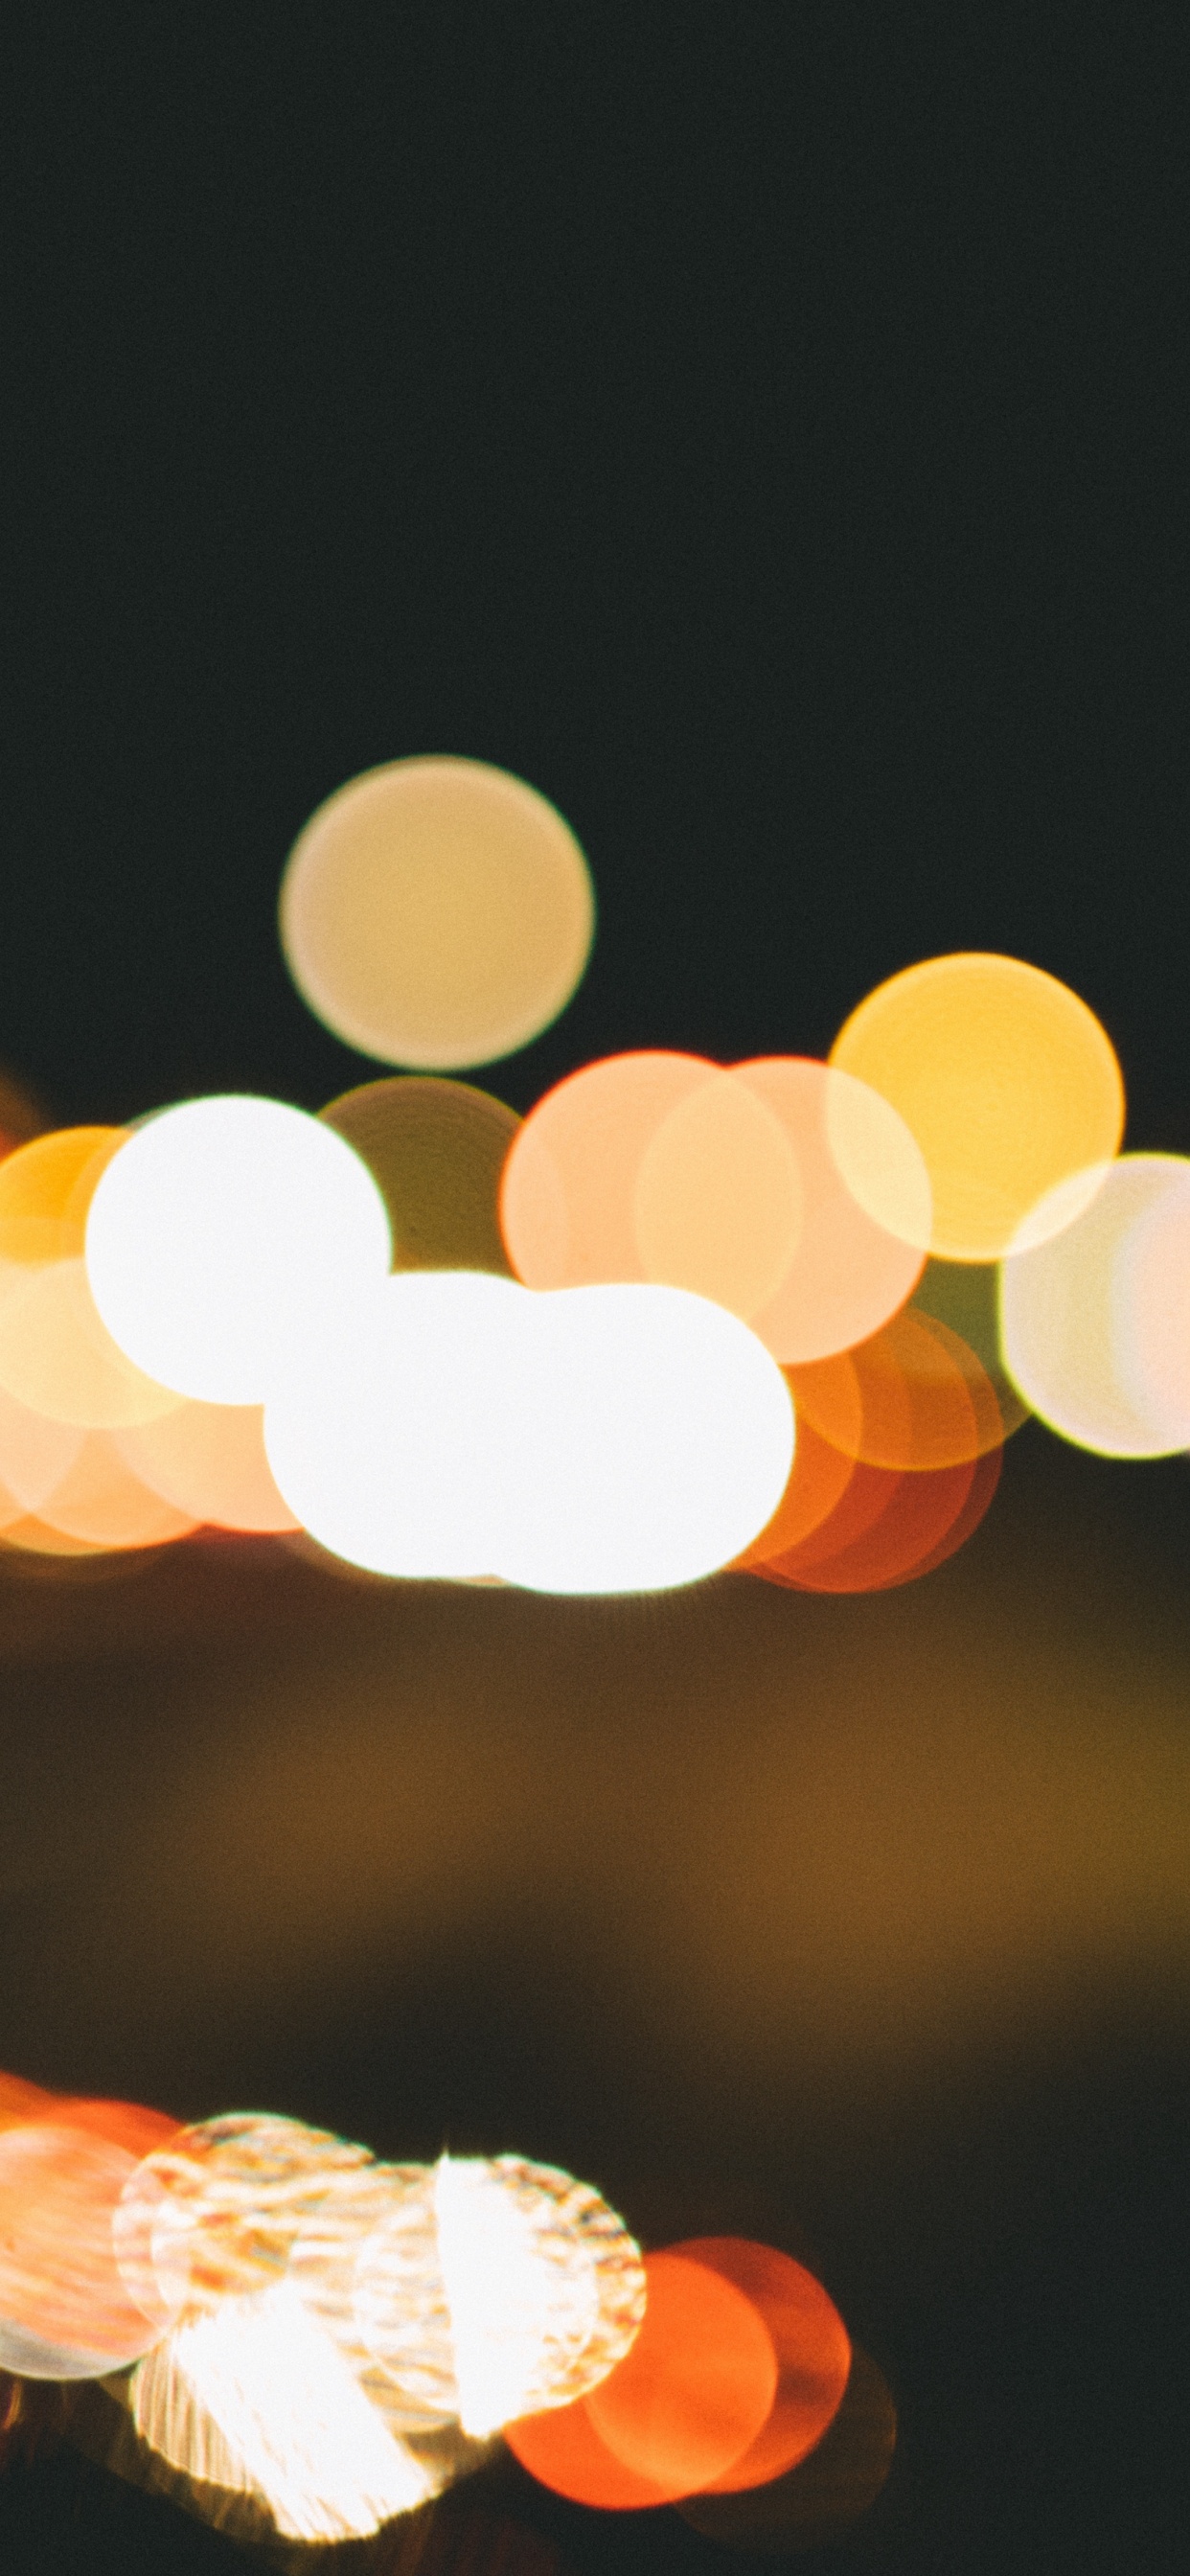 Bokeh Photography of Yellow Lights. Wallpaper in 1242x2688 Resolution